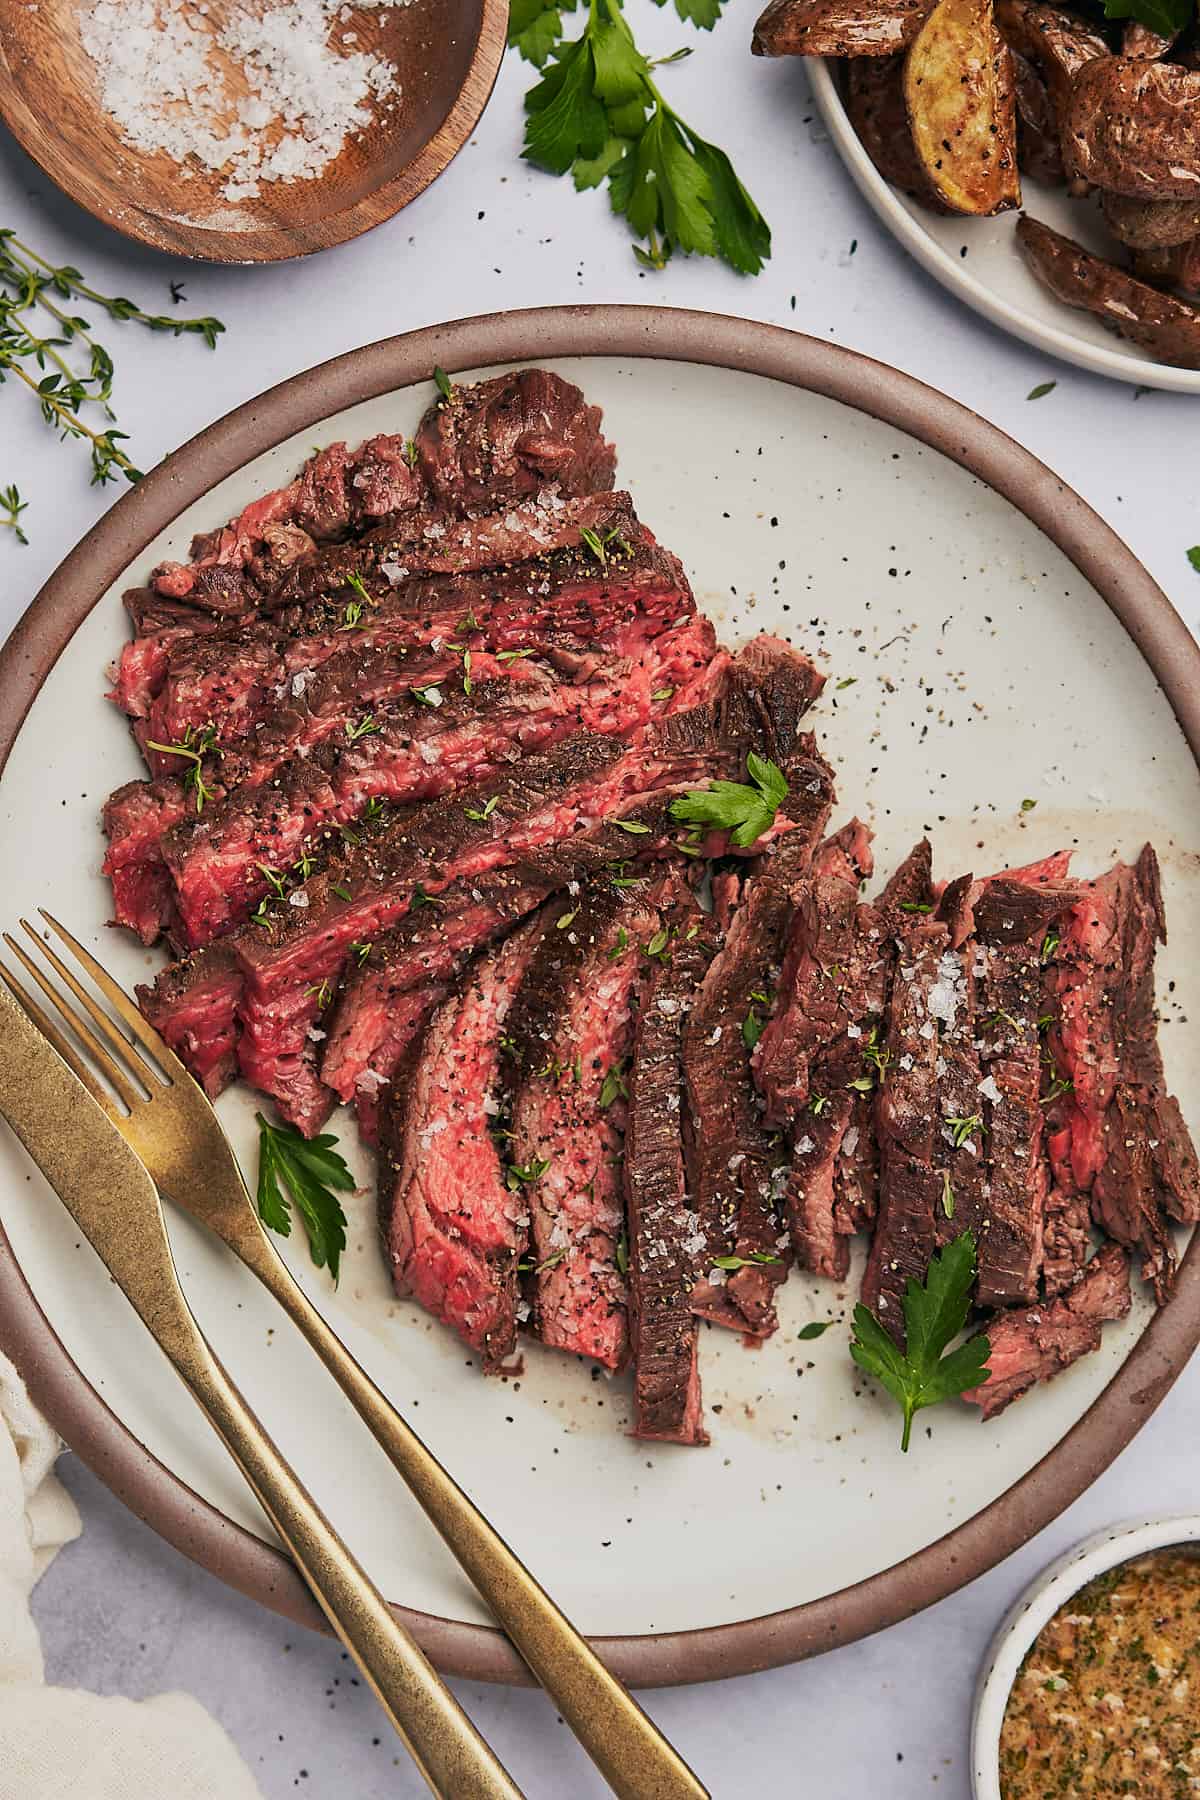 bavette steak cut nicely and served on a plate with gold silverware, parsley, thyme, potatoes, and cowboy butter dipping sauce. 